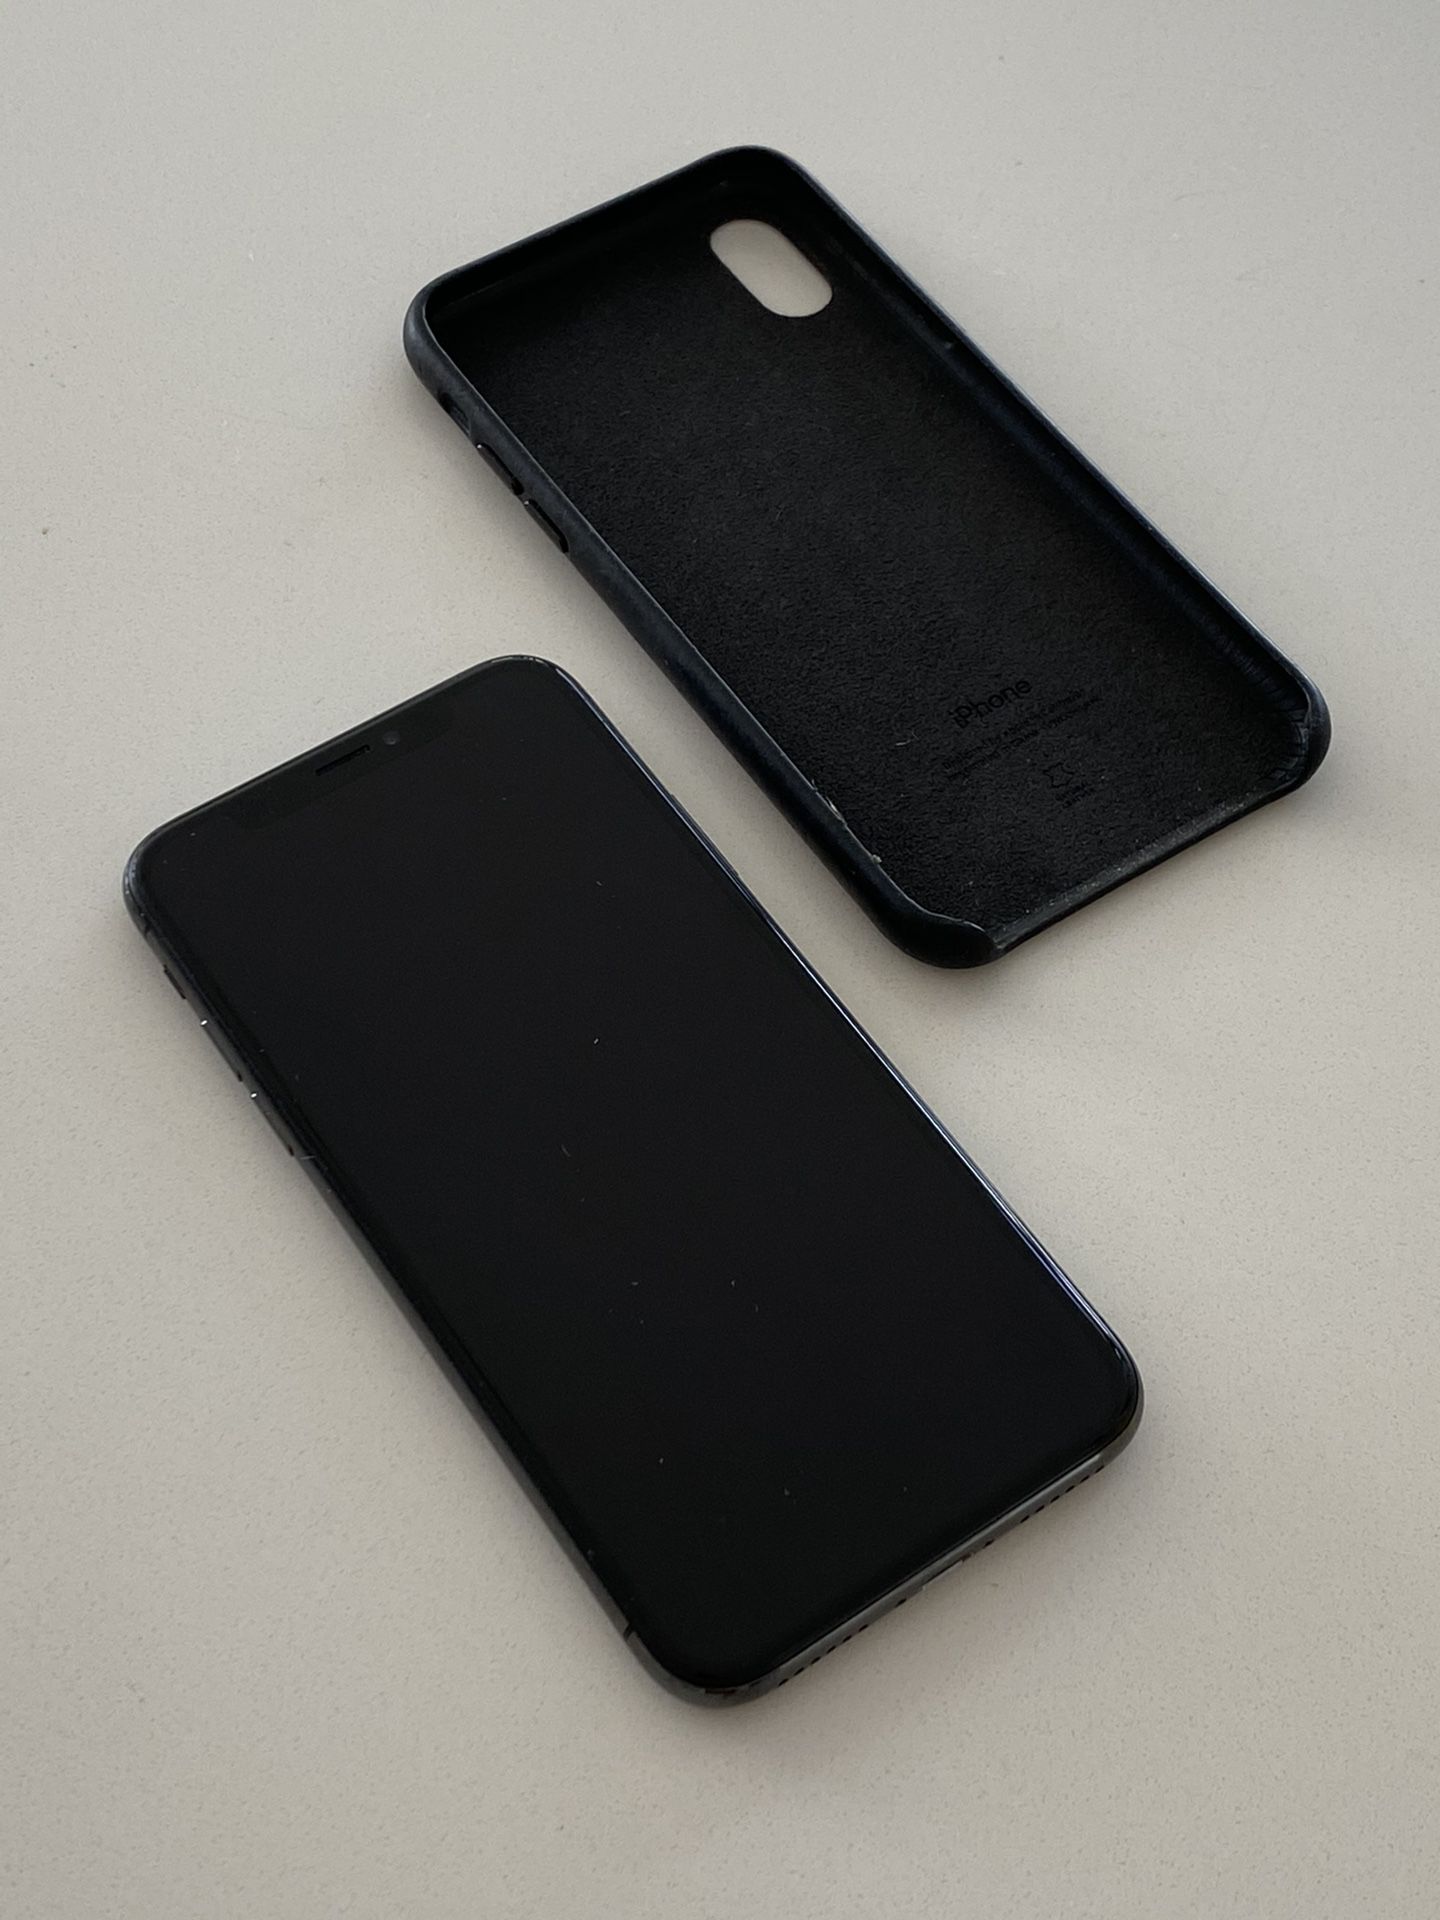 iPhone X 256gb with case